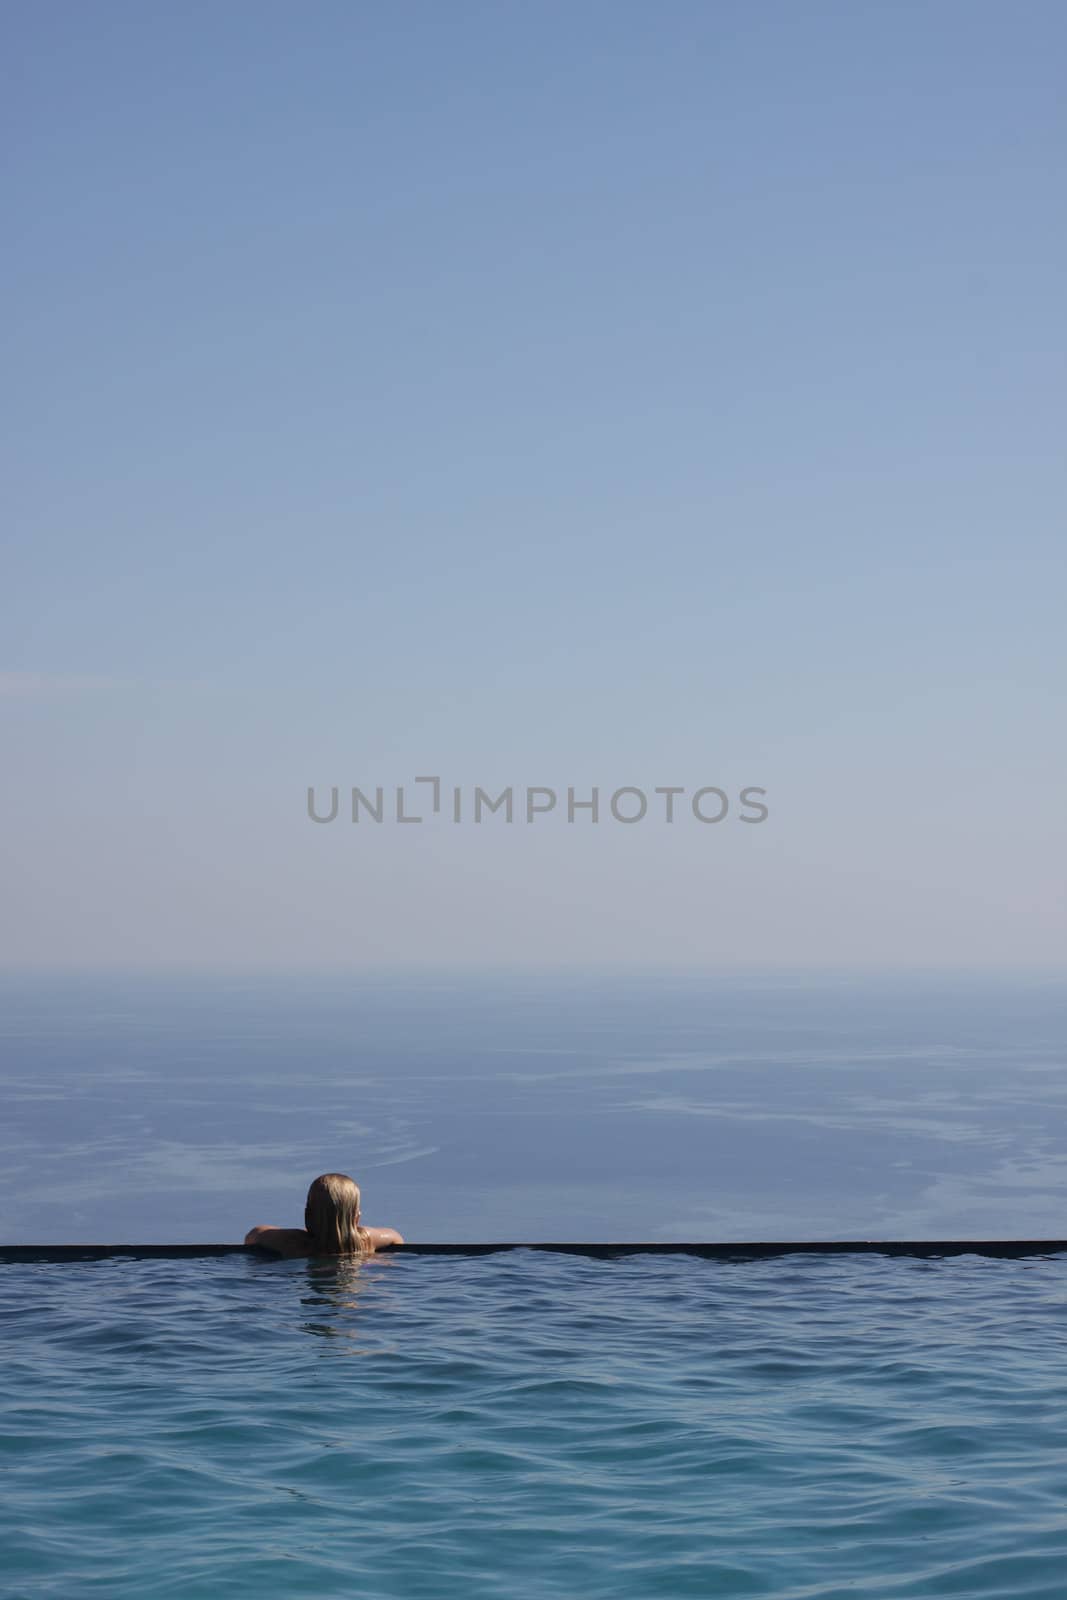 Girl relaxing at the end of an infinity pool, looking at an amazing view of the Mediterranean Sea. Copy space to the right and above